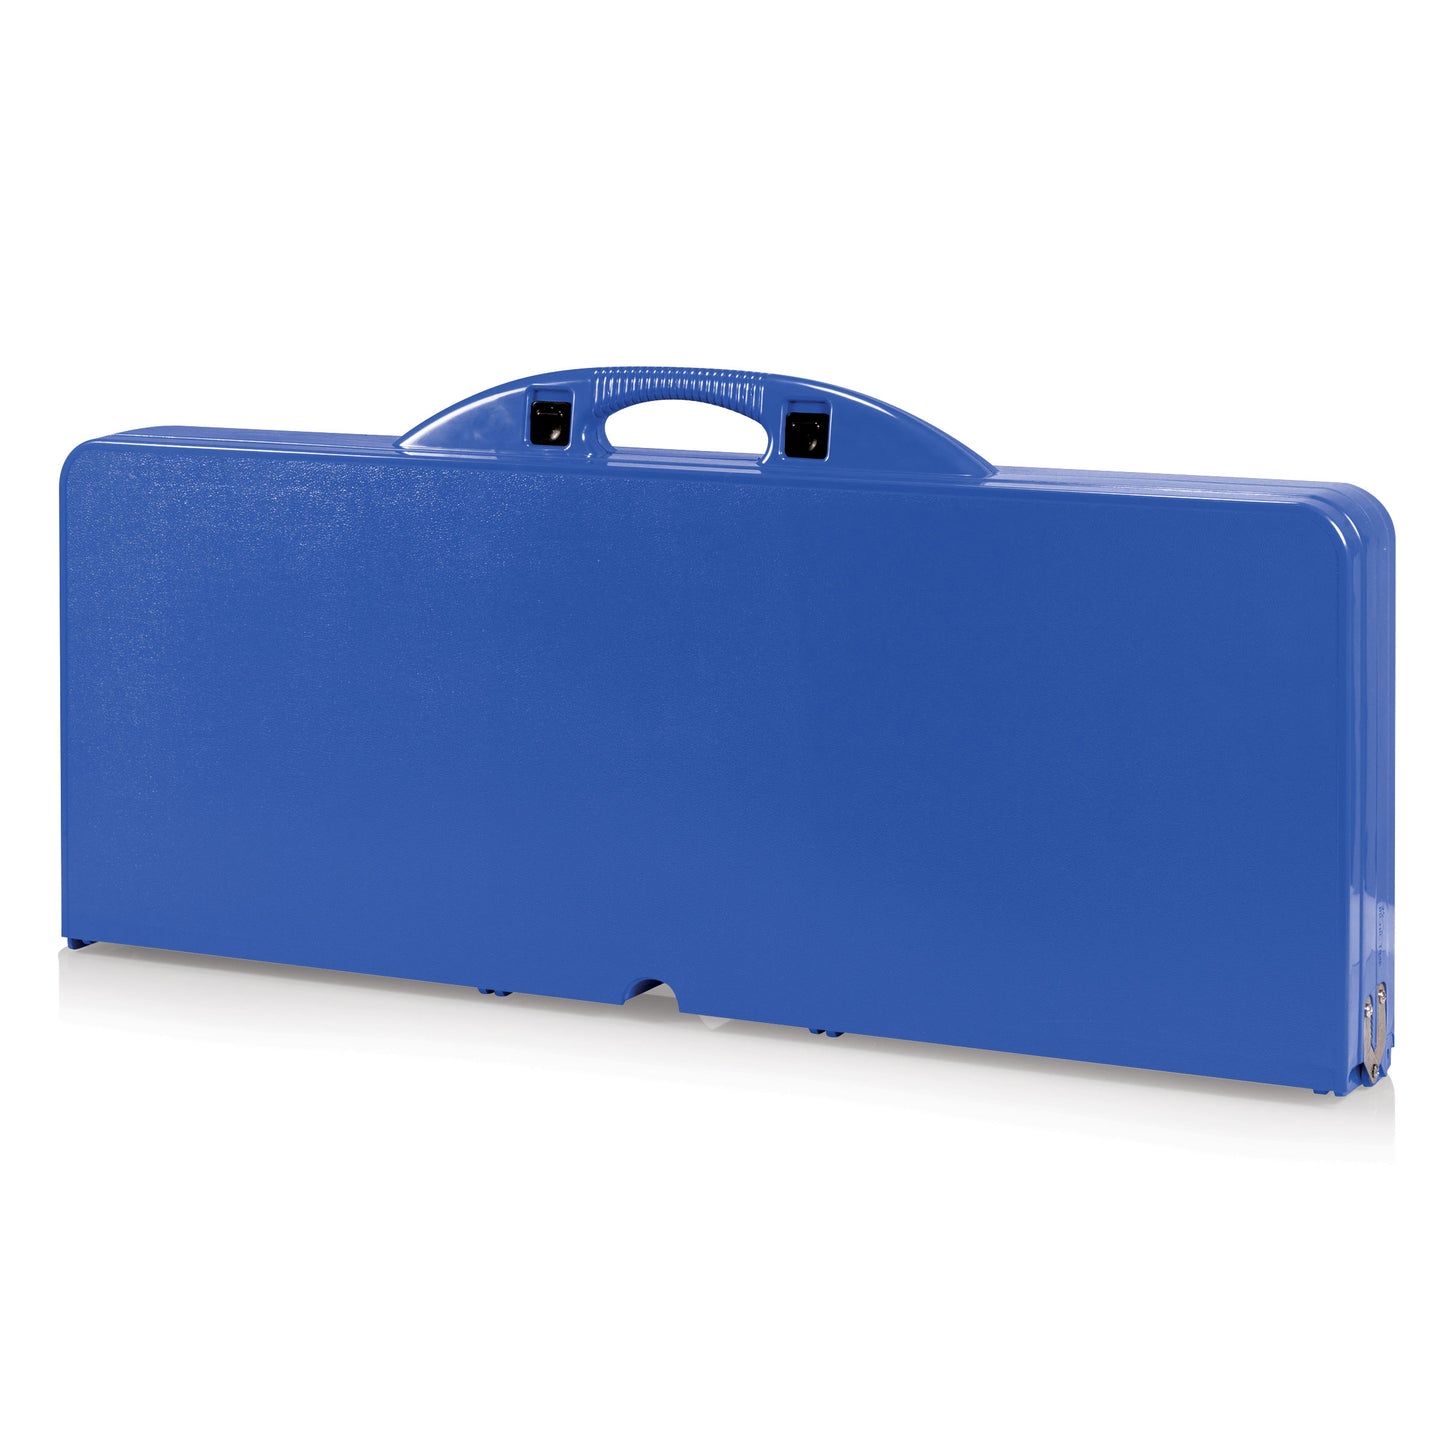 Picnic Table Portable Folding Table with Seats - Royal Blue